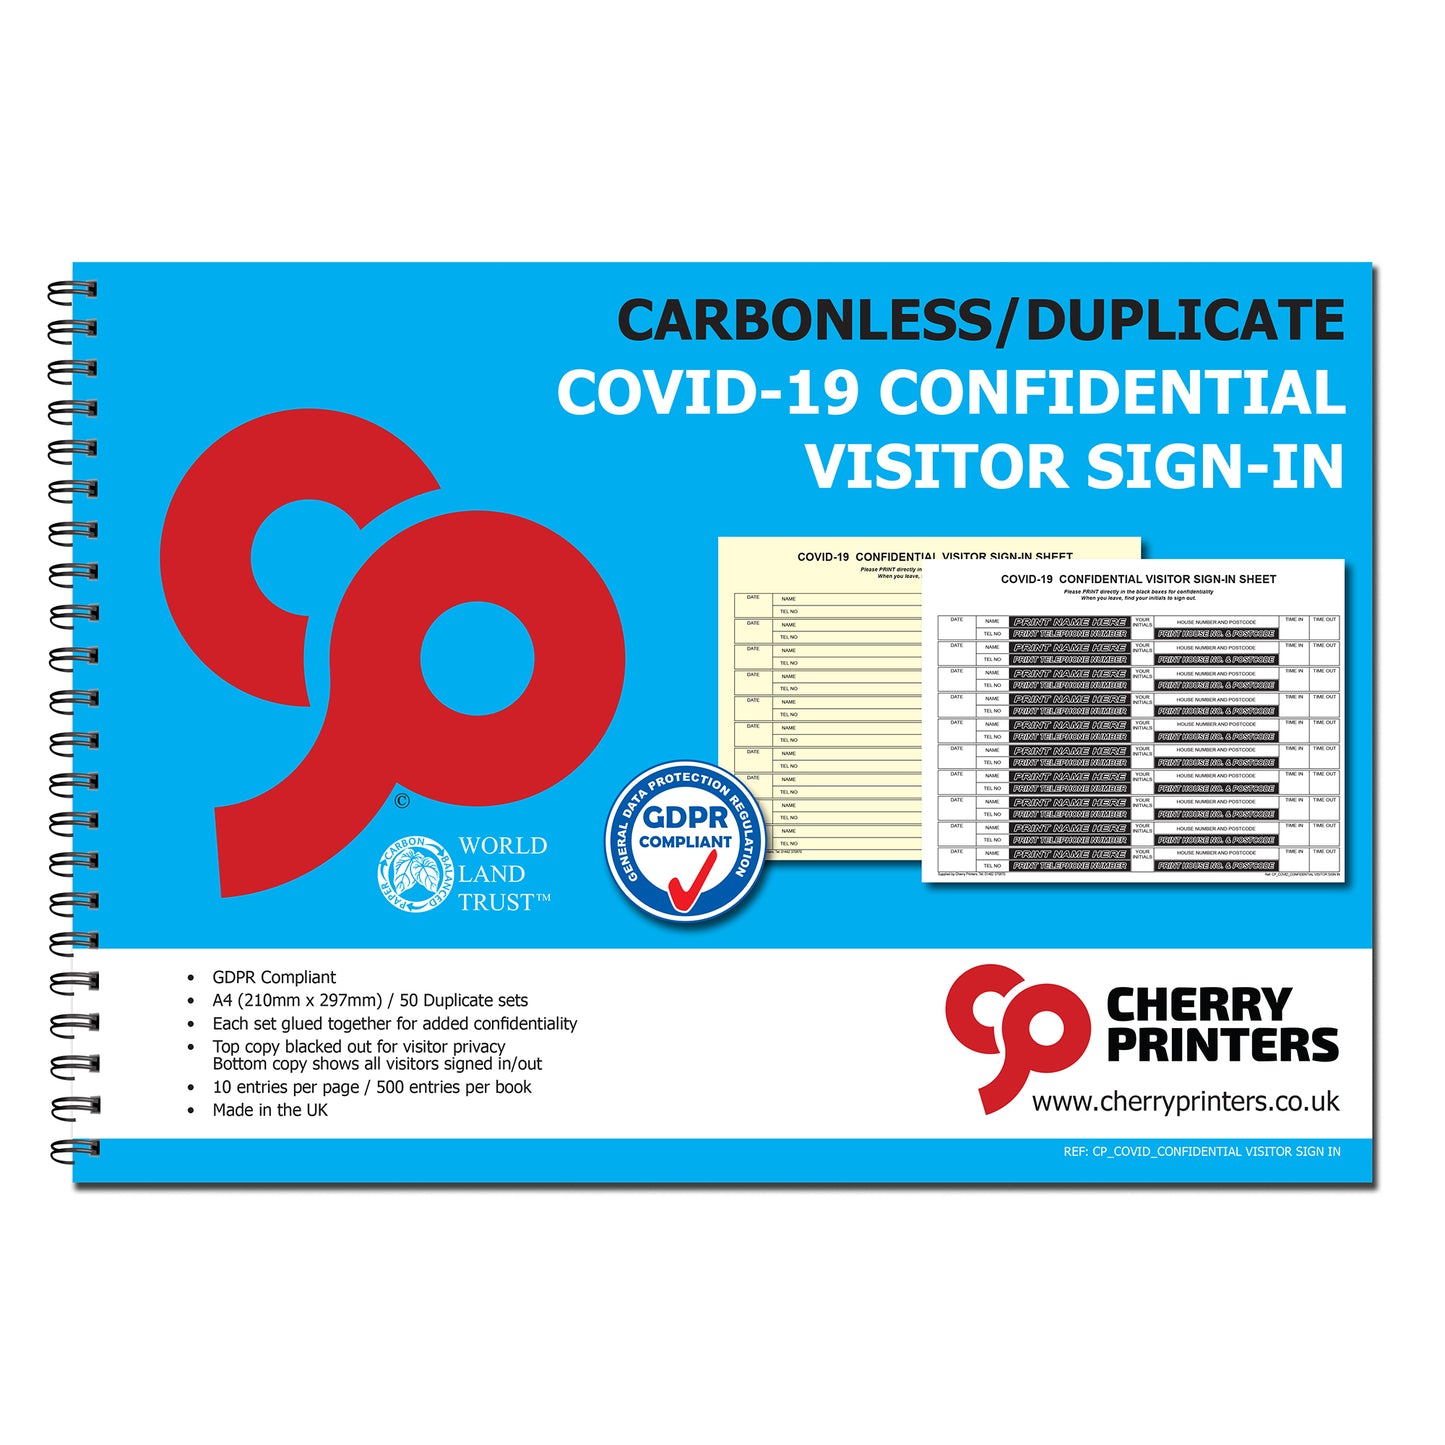 NCR Covid-19 Confidential Visitor Sign in Duplicate Wiro Book A4 50 sets GDPR